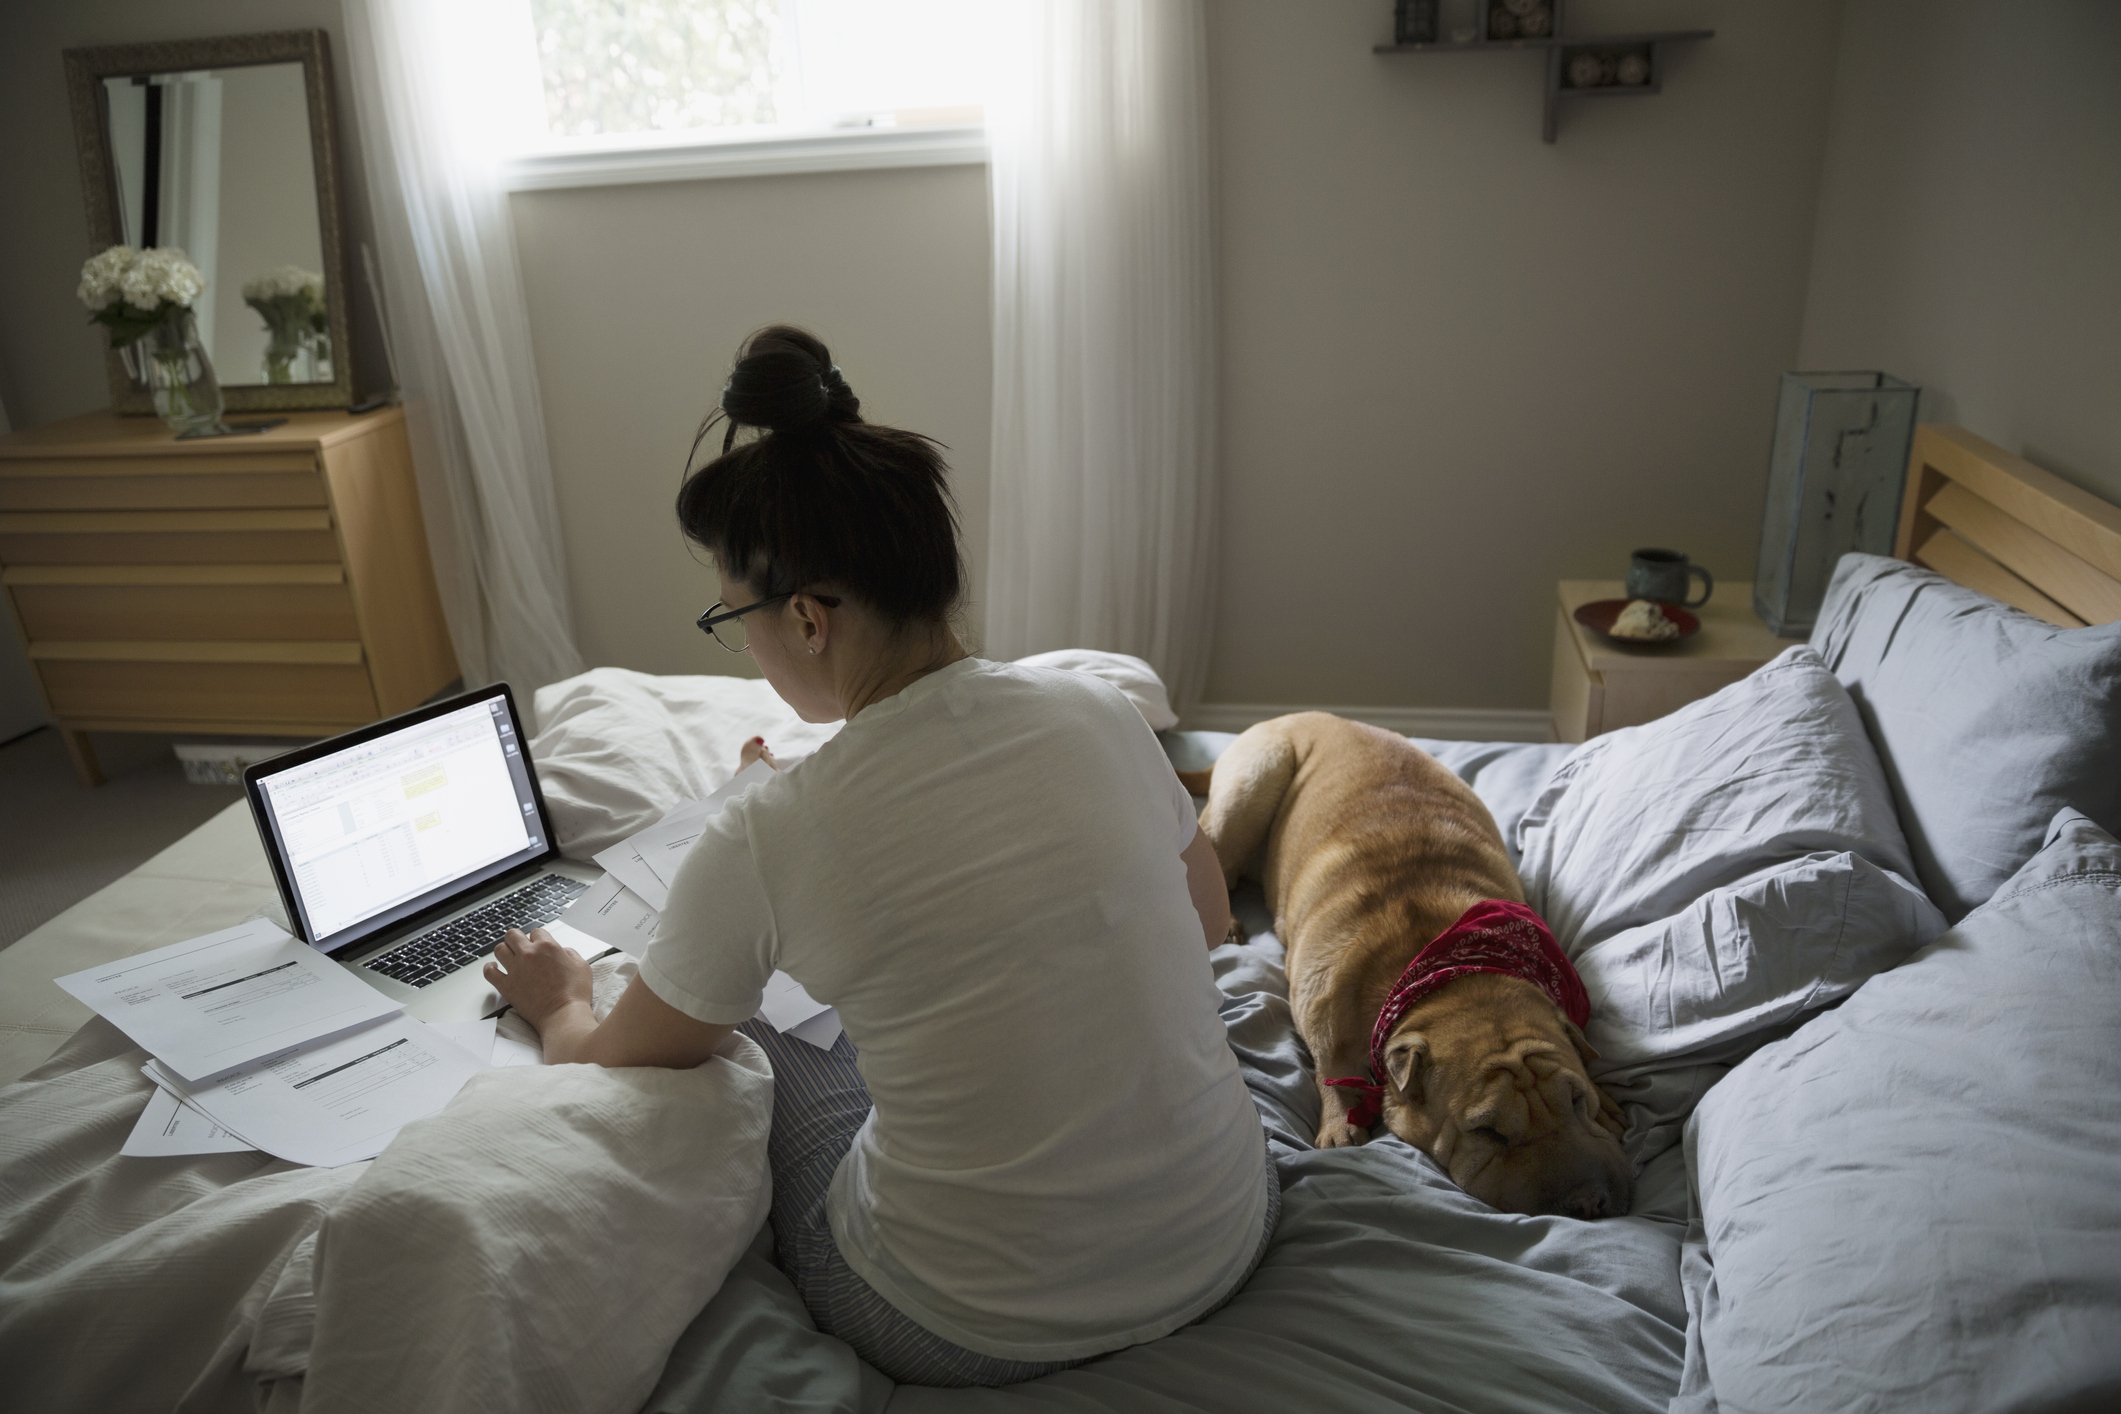 Woman working bed at laptop by sleeping dog